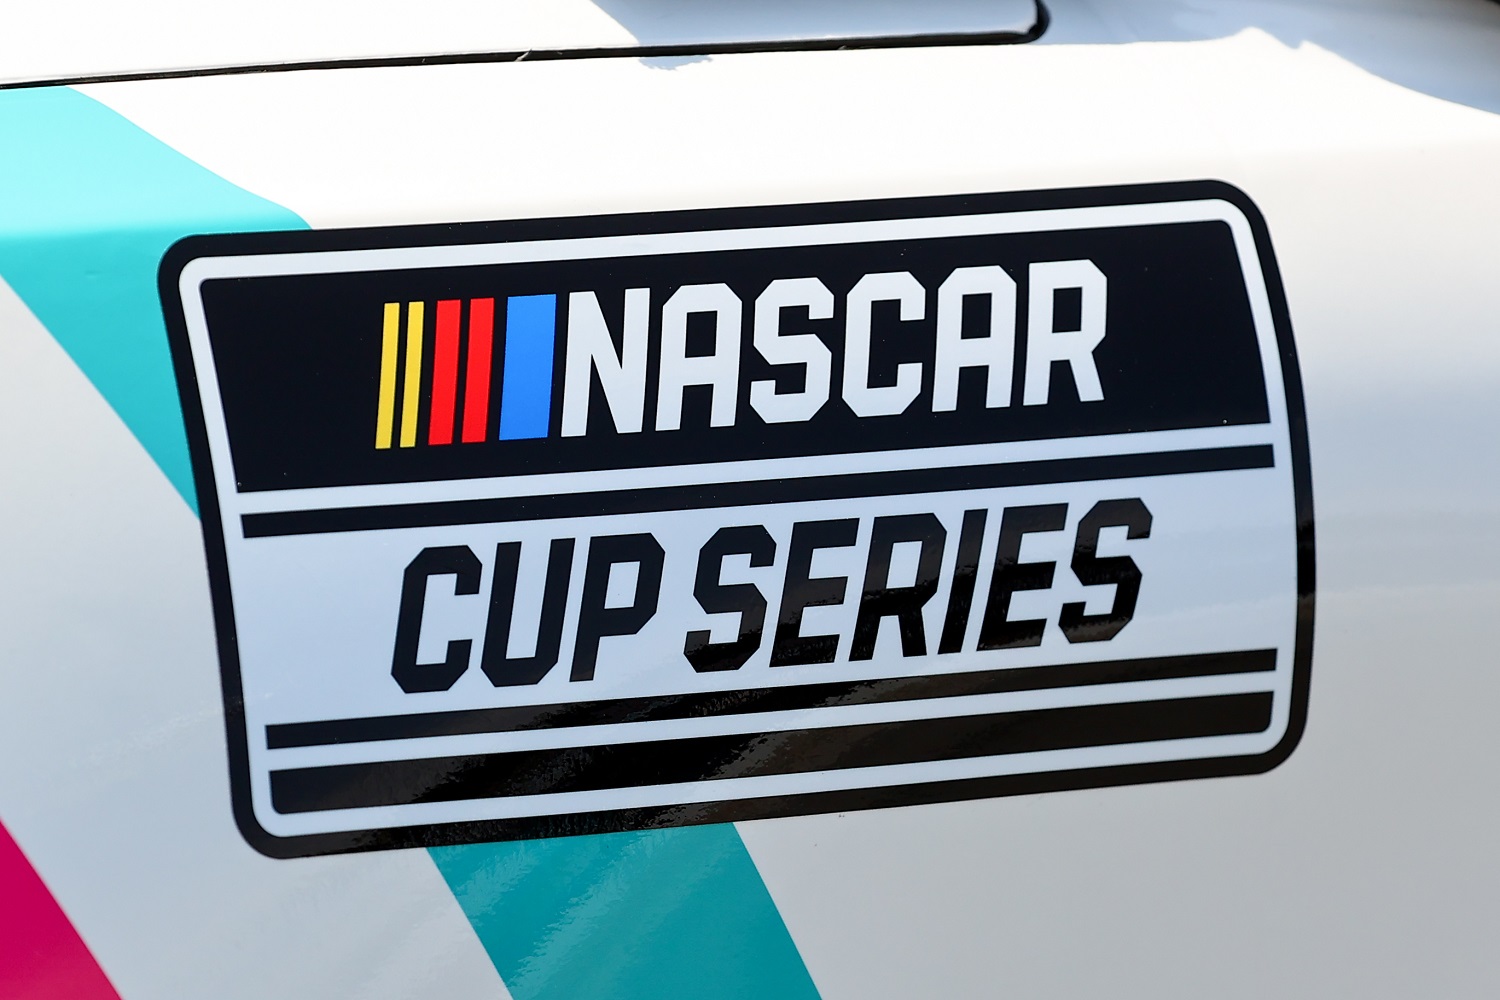 A general view of the NASCAR Cup Series logo prior to the M&Ms Fan Appreciation 400 on July 24, 2022 at Pocono Raceway in Long Pond, Pennsylvania.